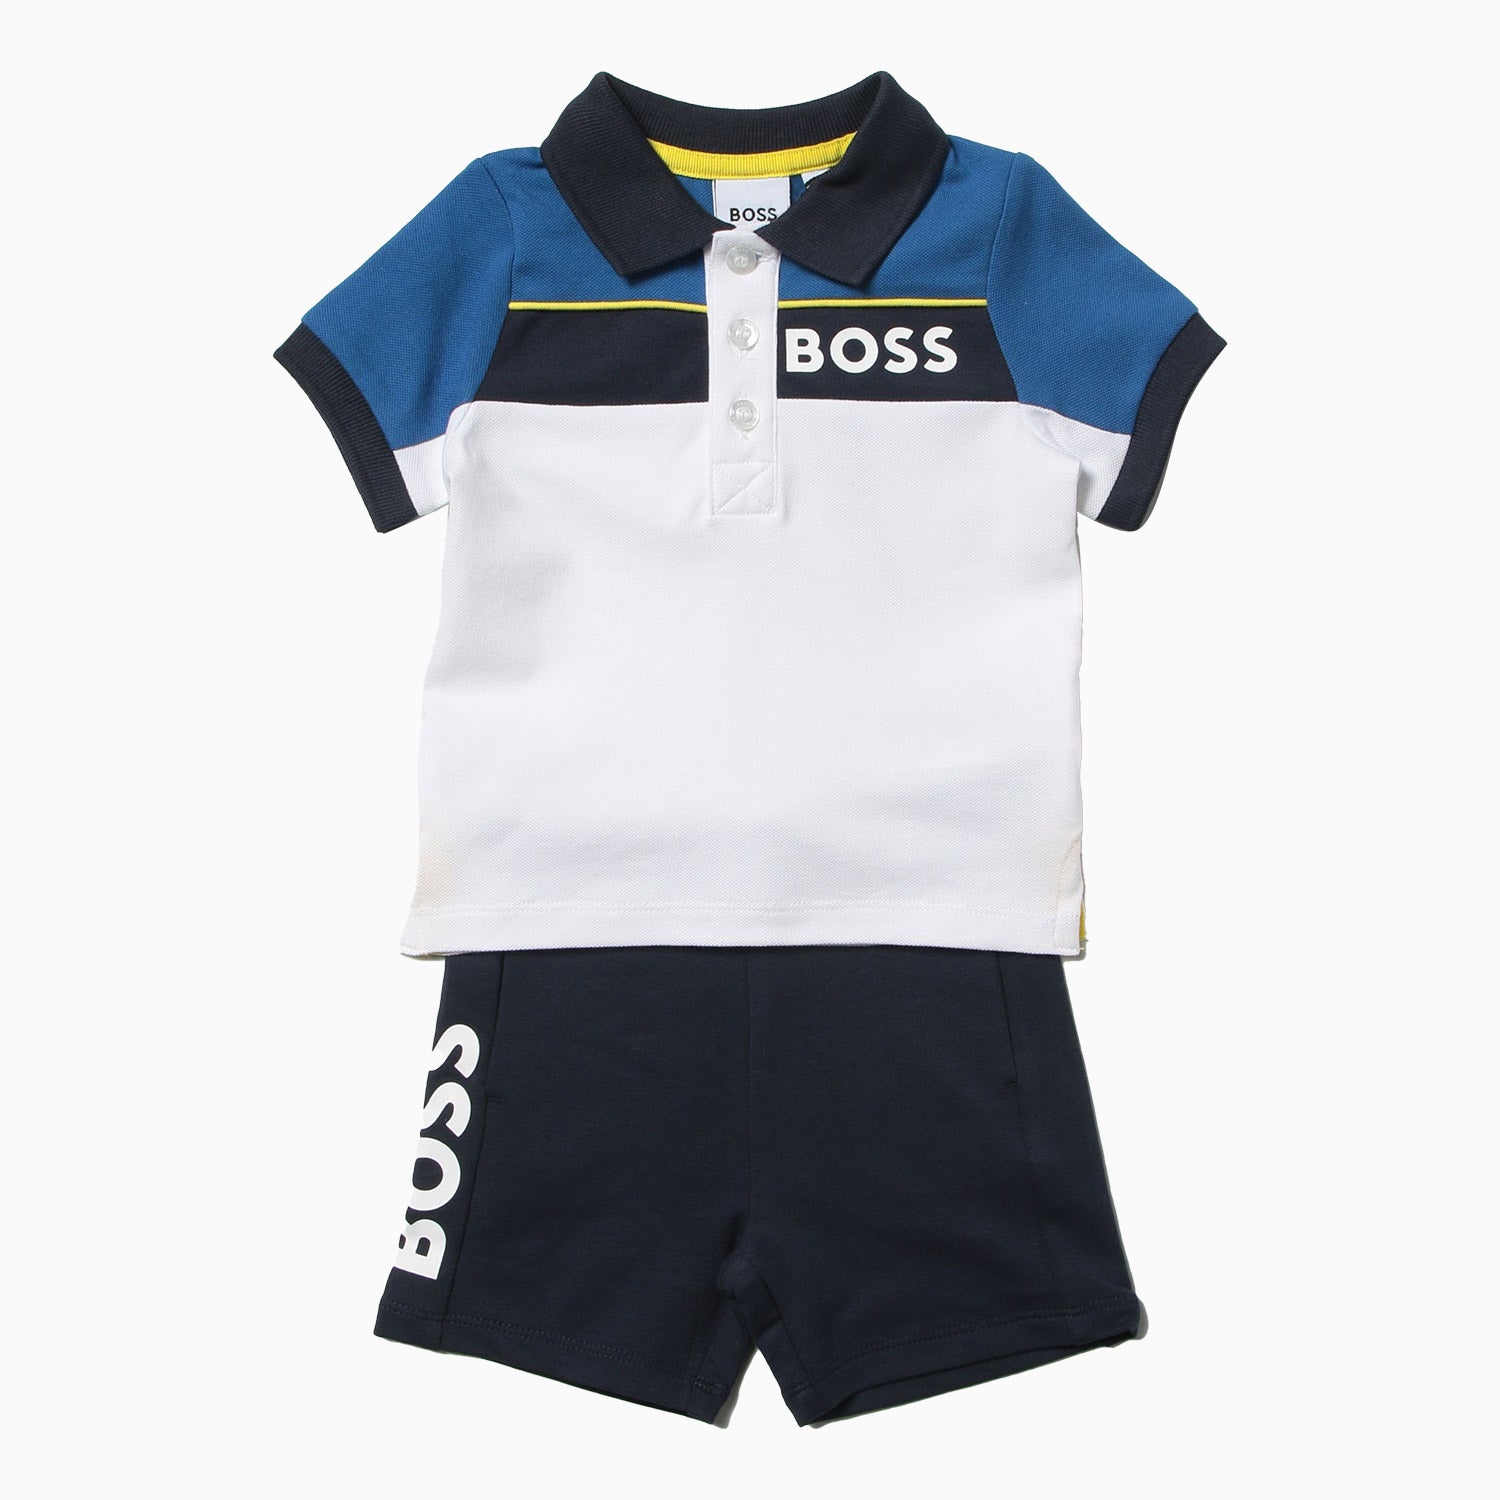 Hugo Boss Kid's Polo Outfit - Color: Navy - Kids Premium Clothing -